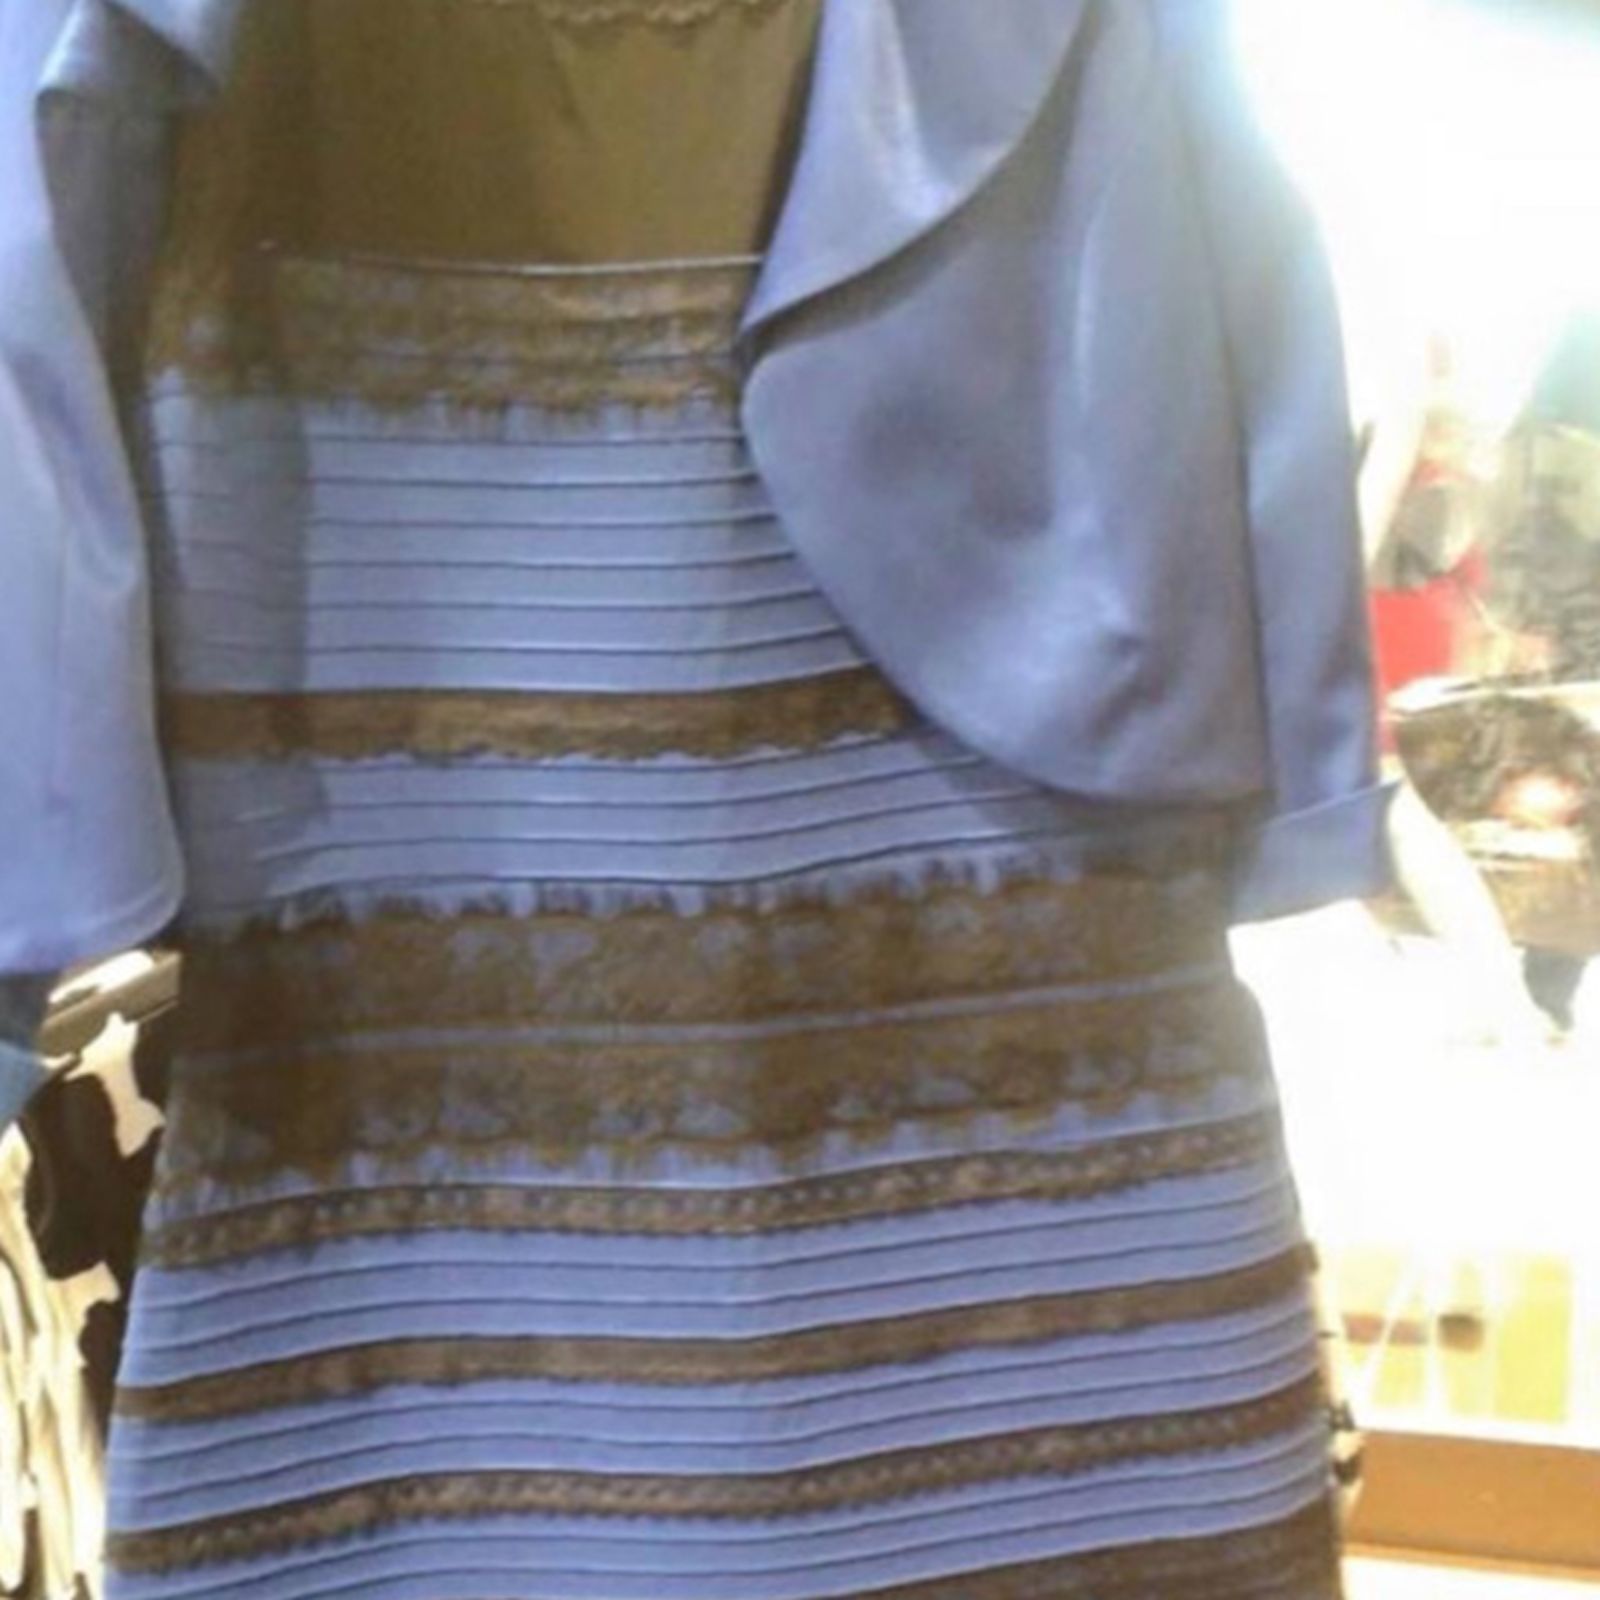 Pat Begrafenis Ondergedompeld What color is this dress? | CNN